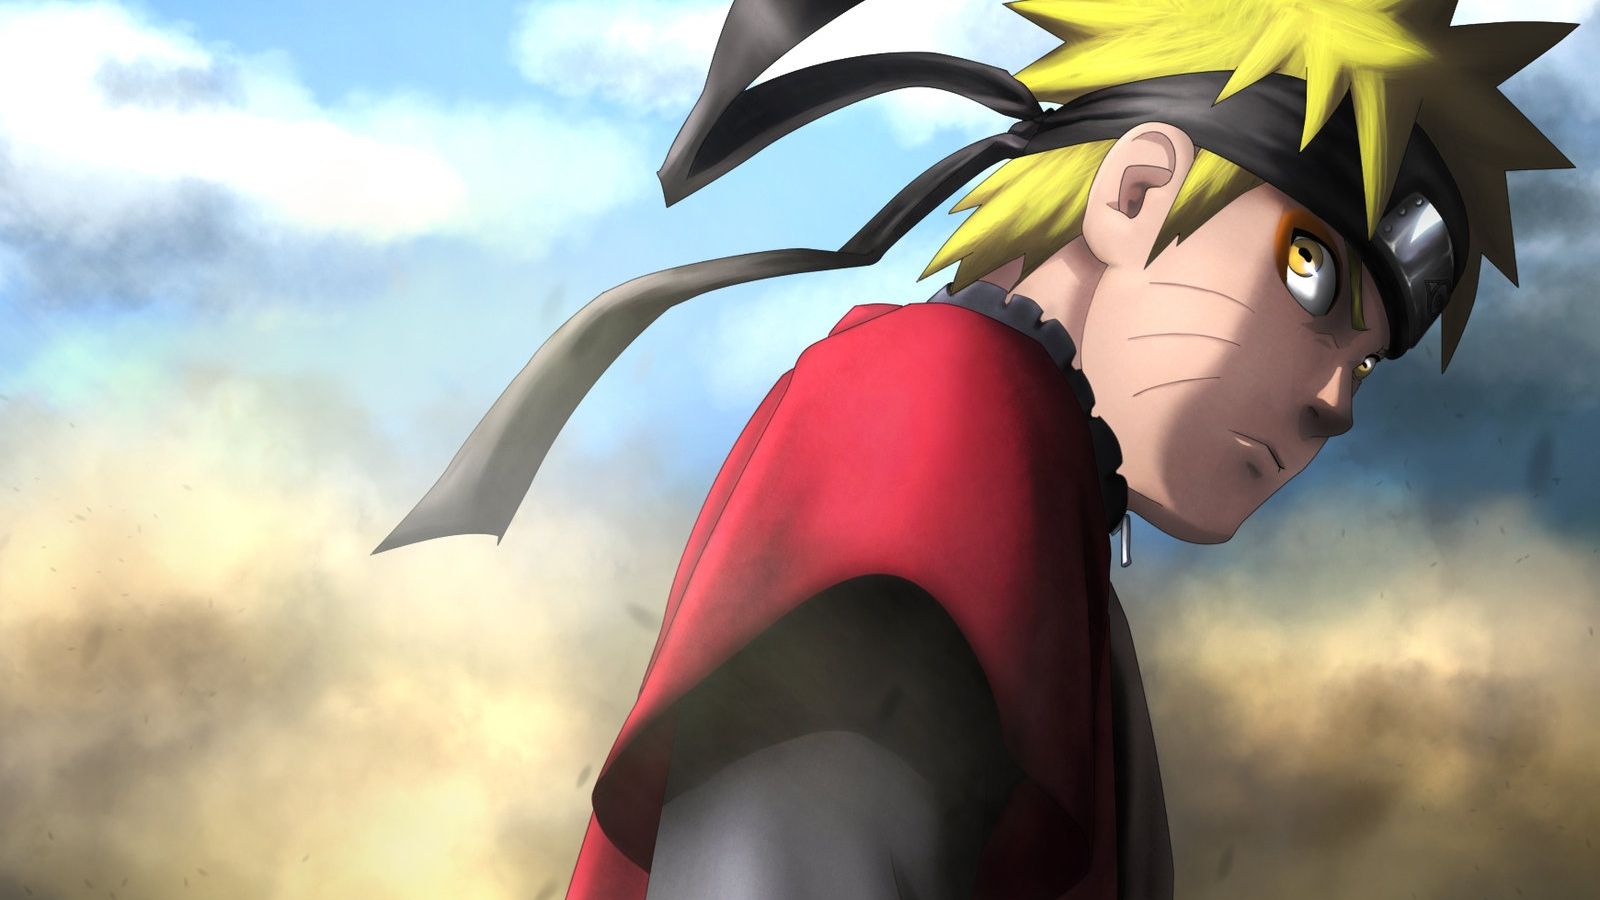 Free download Naruto Sage Mode by iDaisan 1600x1287 for your Desktop, Mobil...